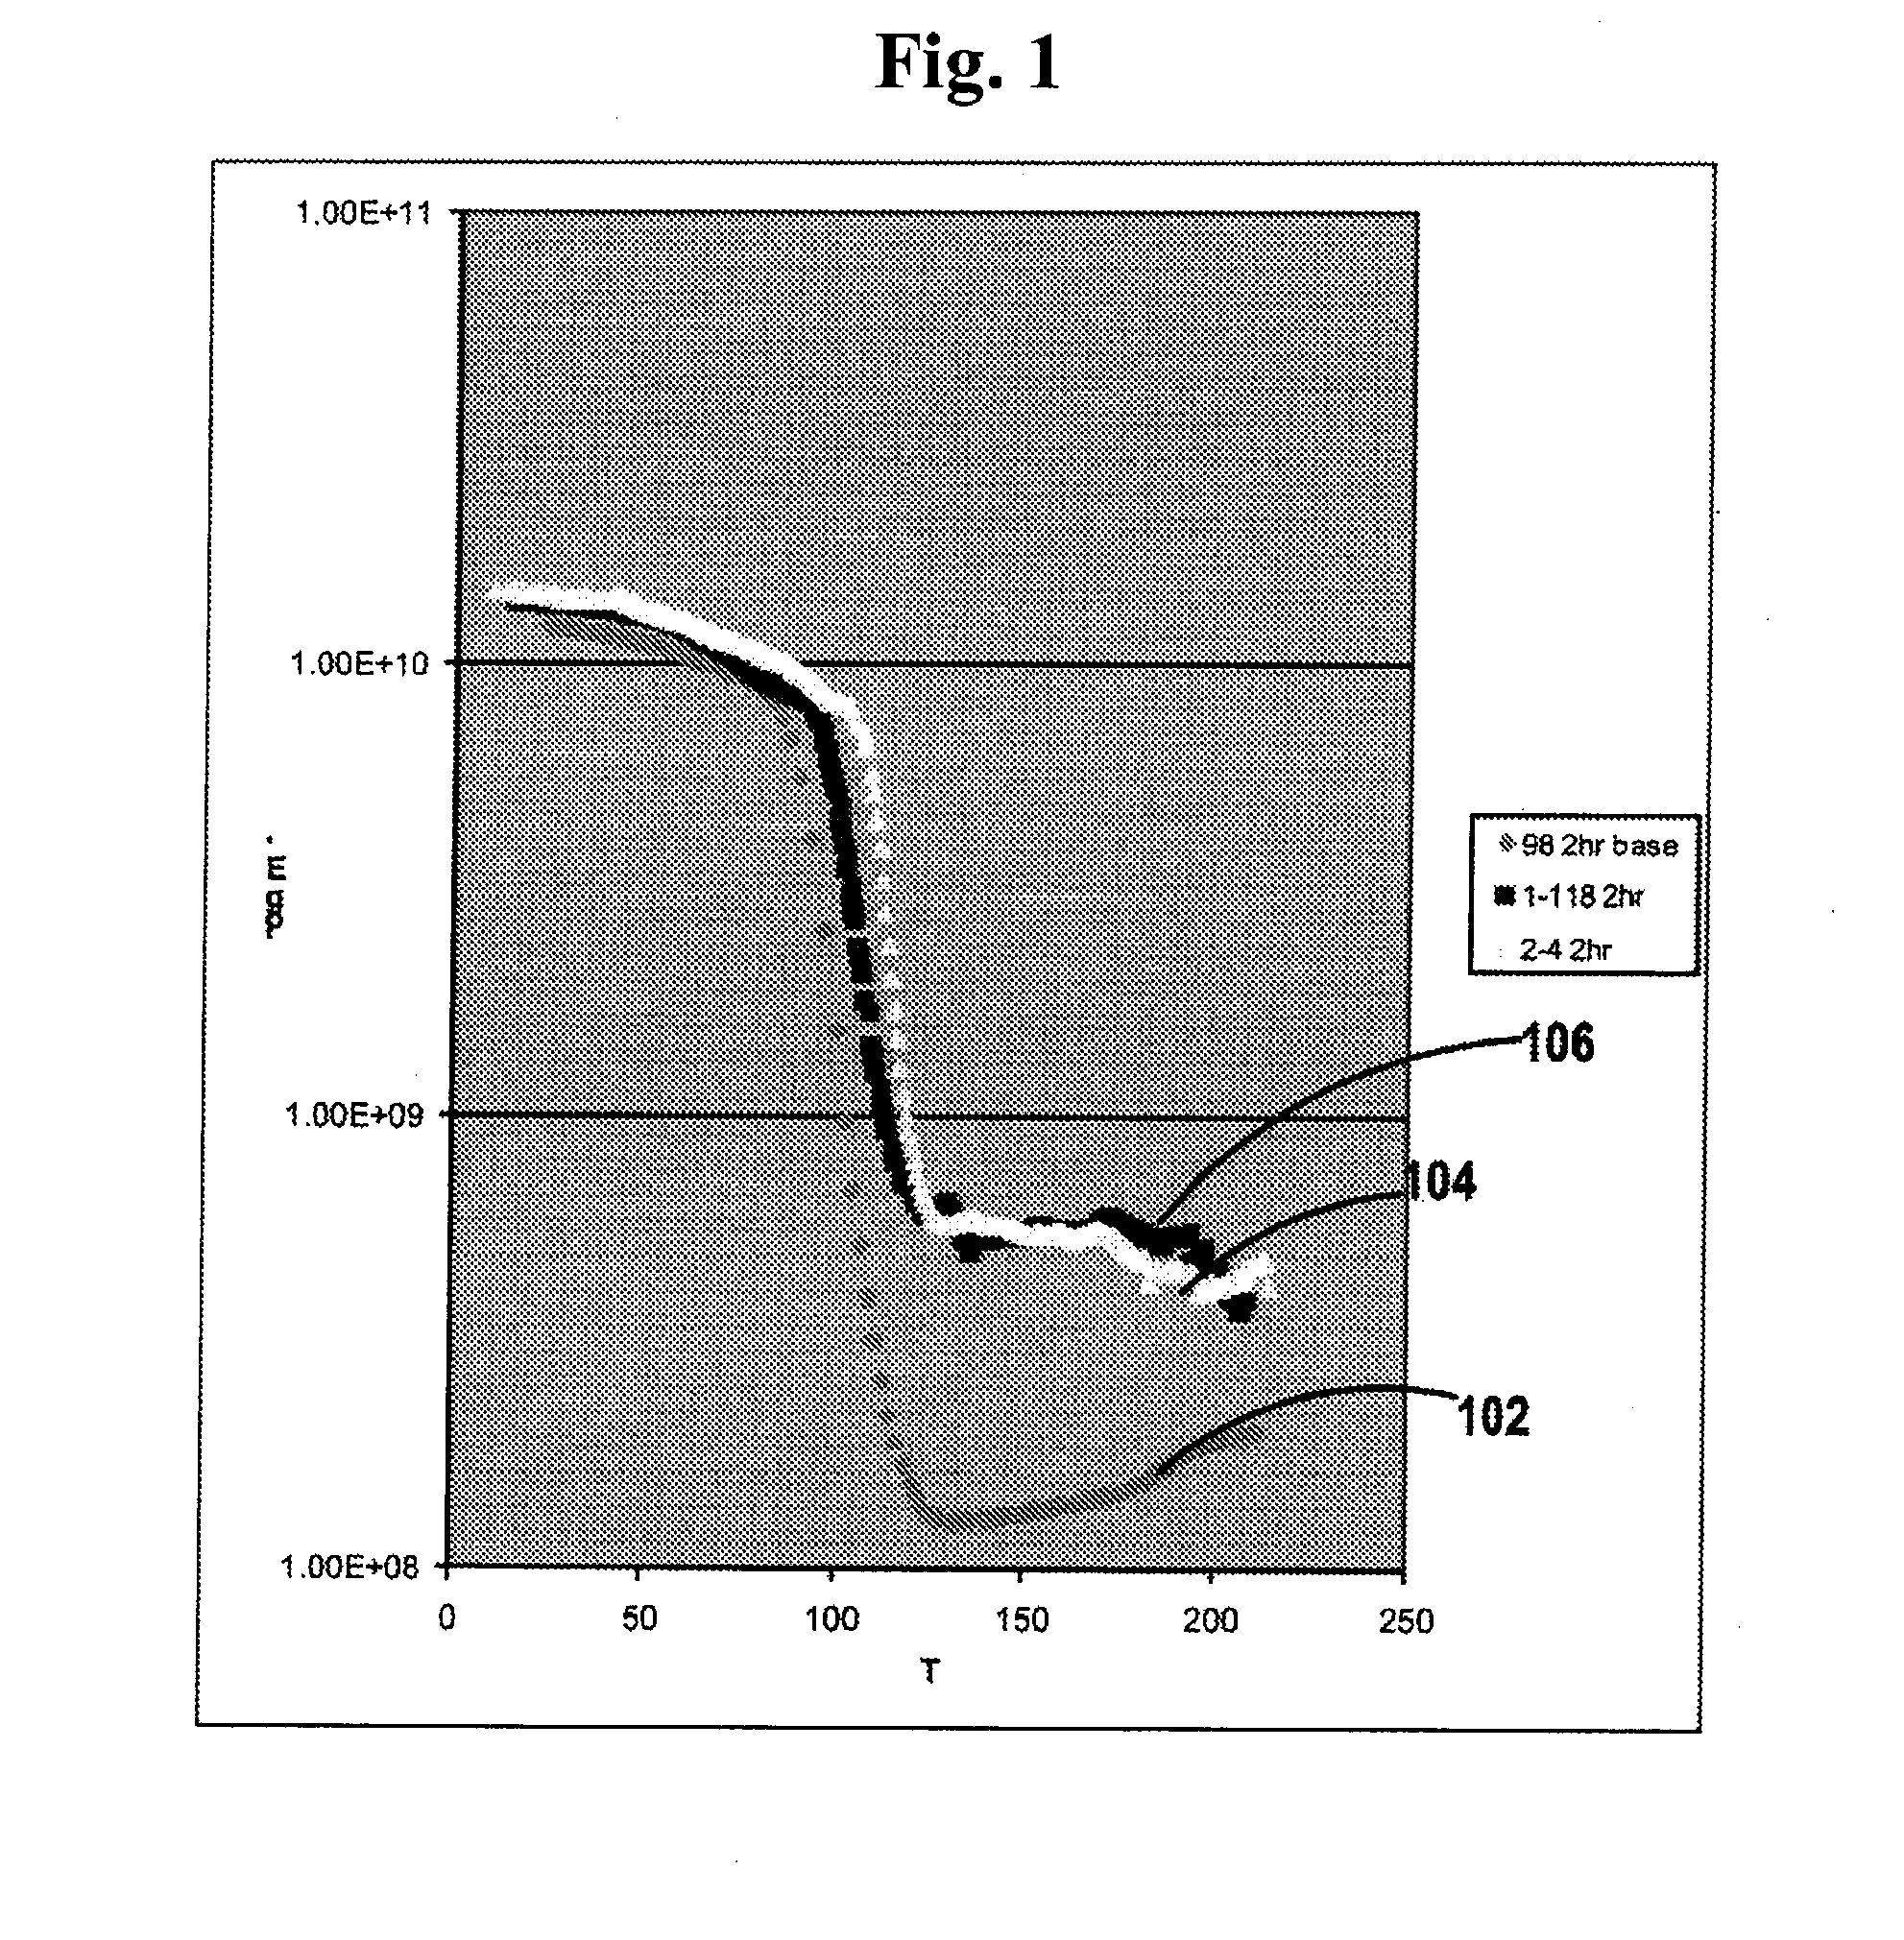 Underfill for high density interconnect flip chips